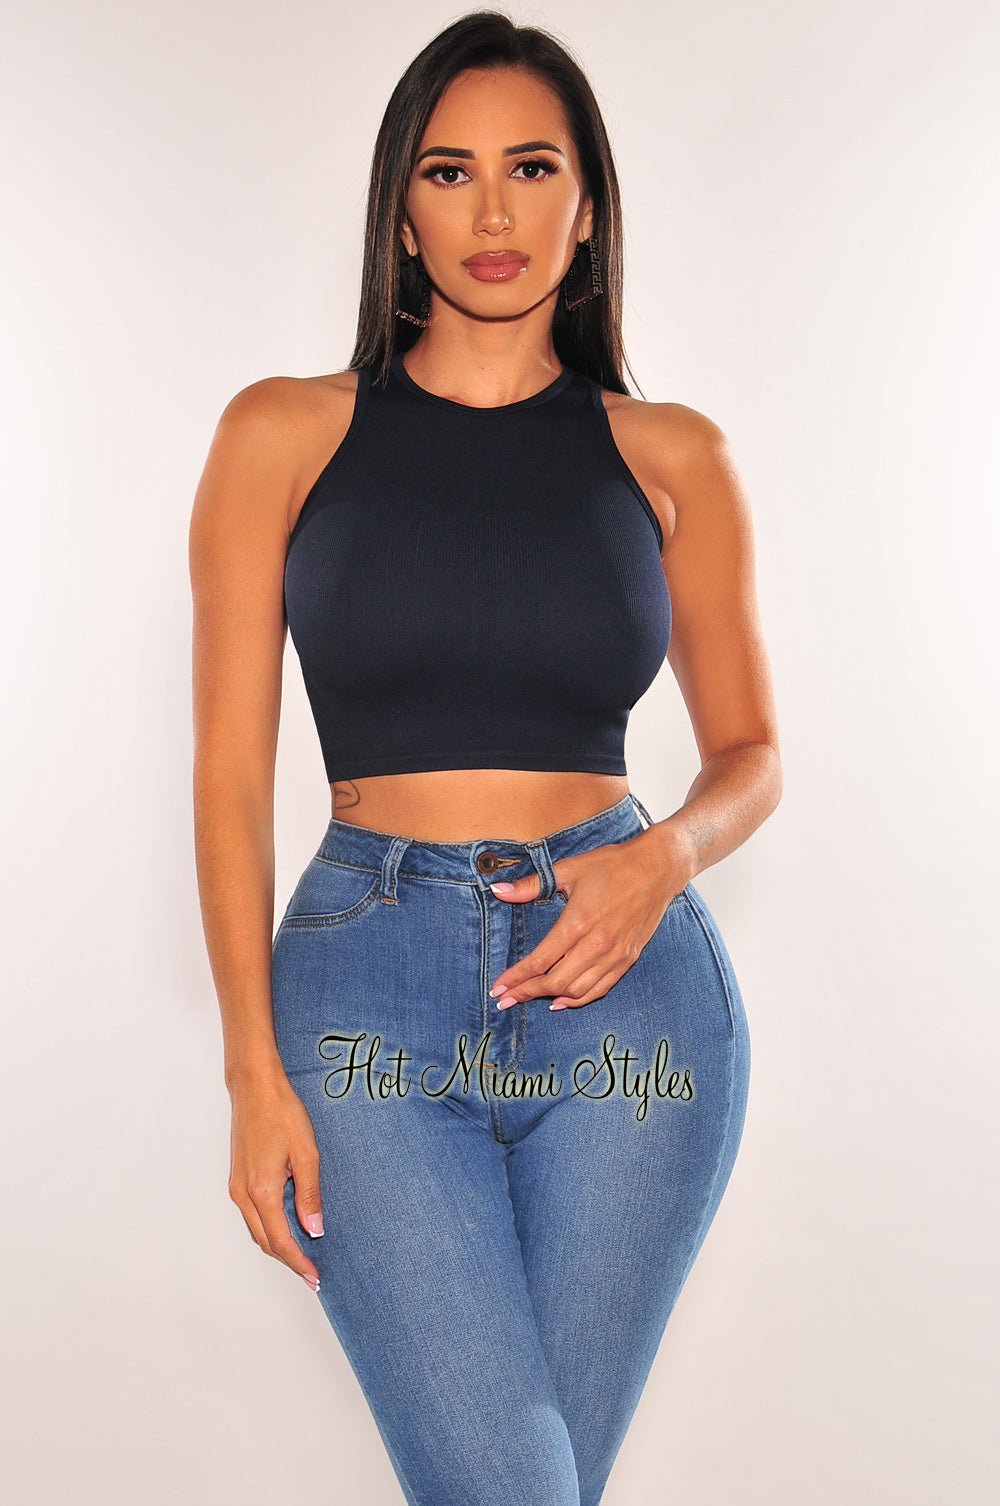 White Bandeau Tie Up High Waist Leggings Two Piece Set - Hot Miami Styles